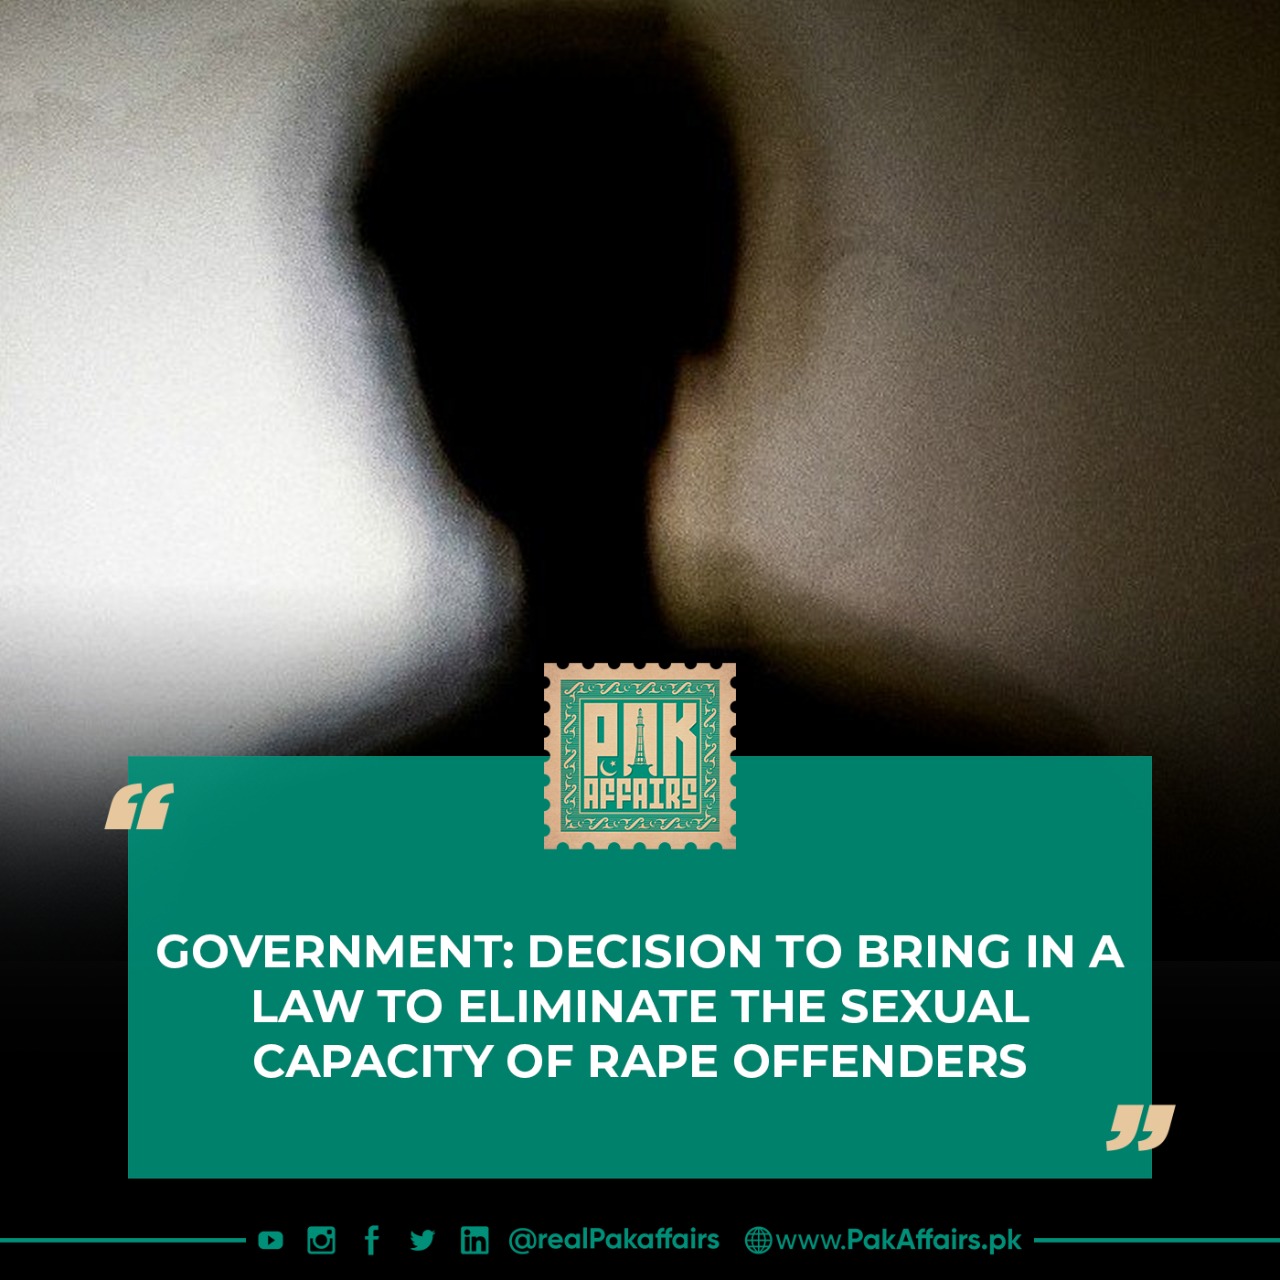 Government: Decision to bring in a law to eliminate the sexual capacity of rape offenders.